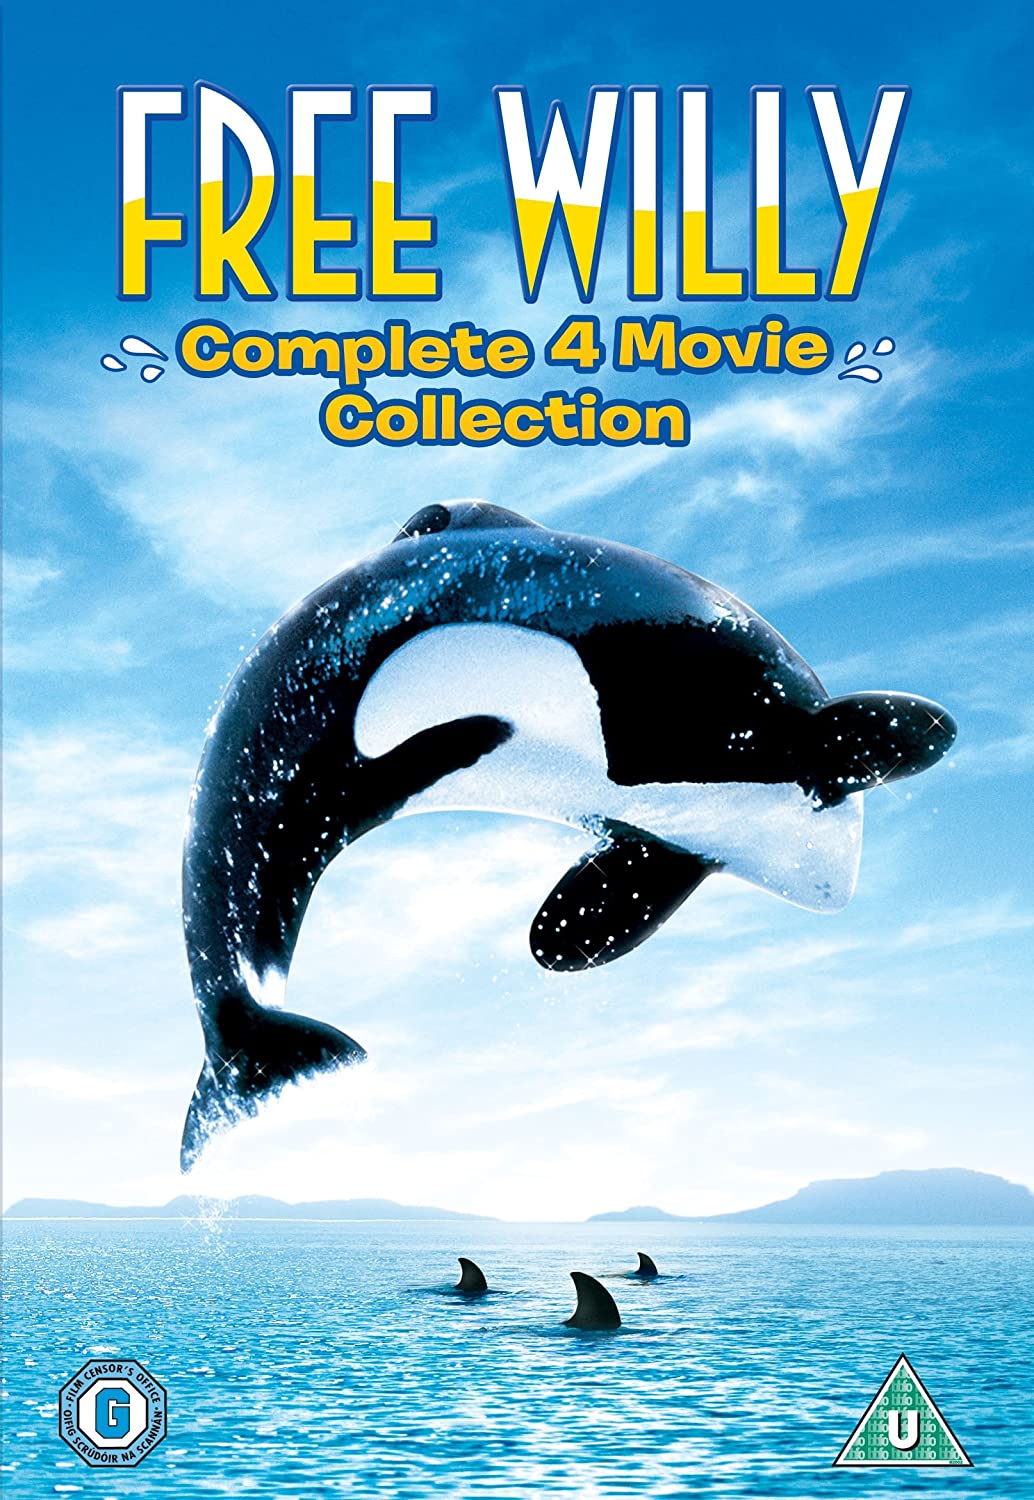 Free Willy 1-4 [DVD] [1993]